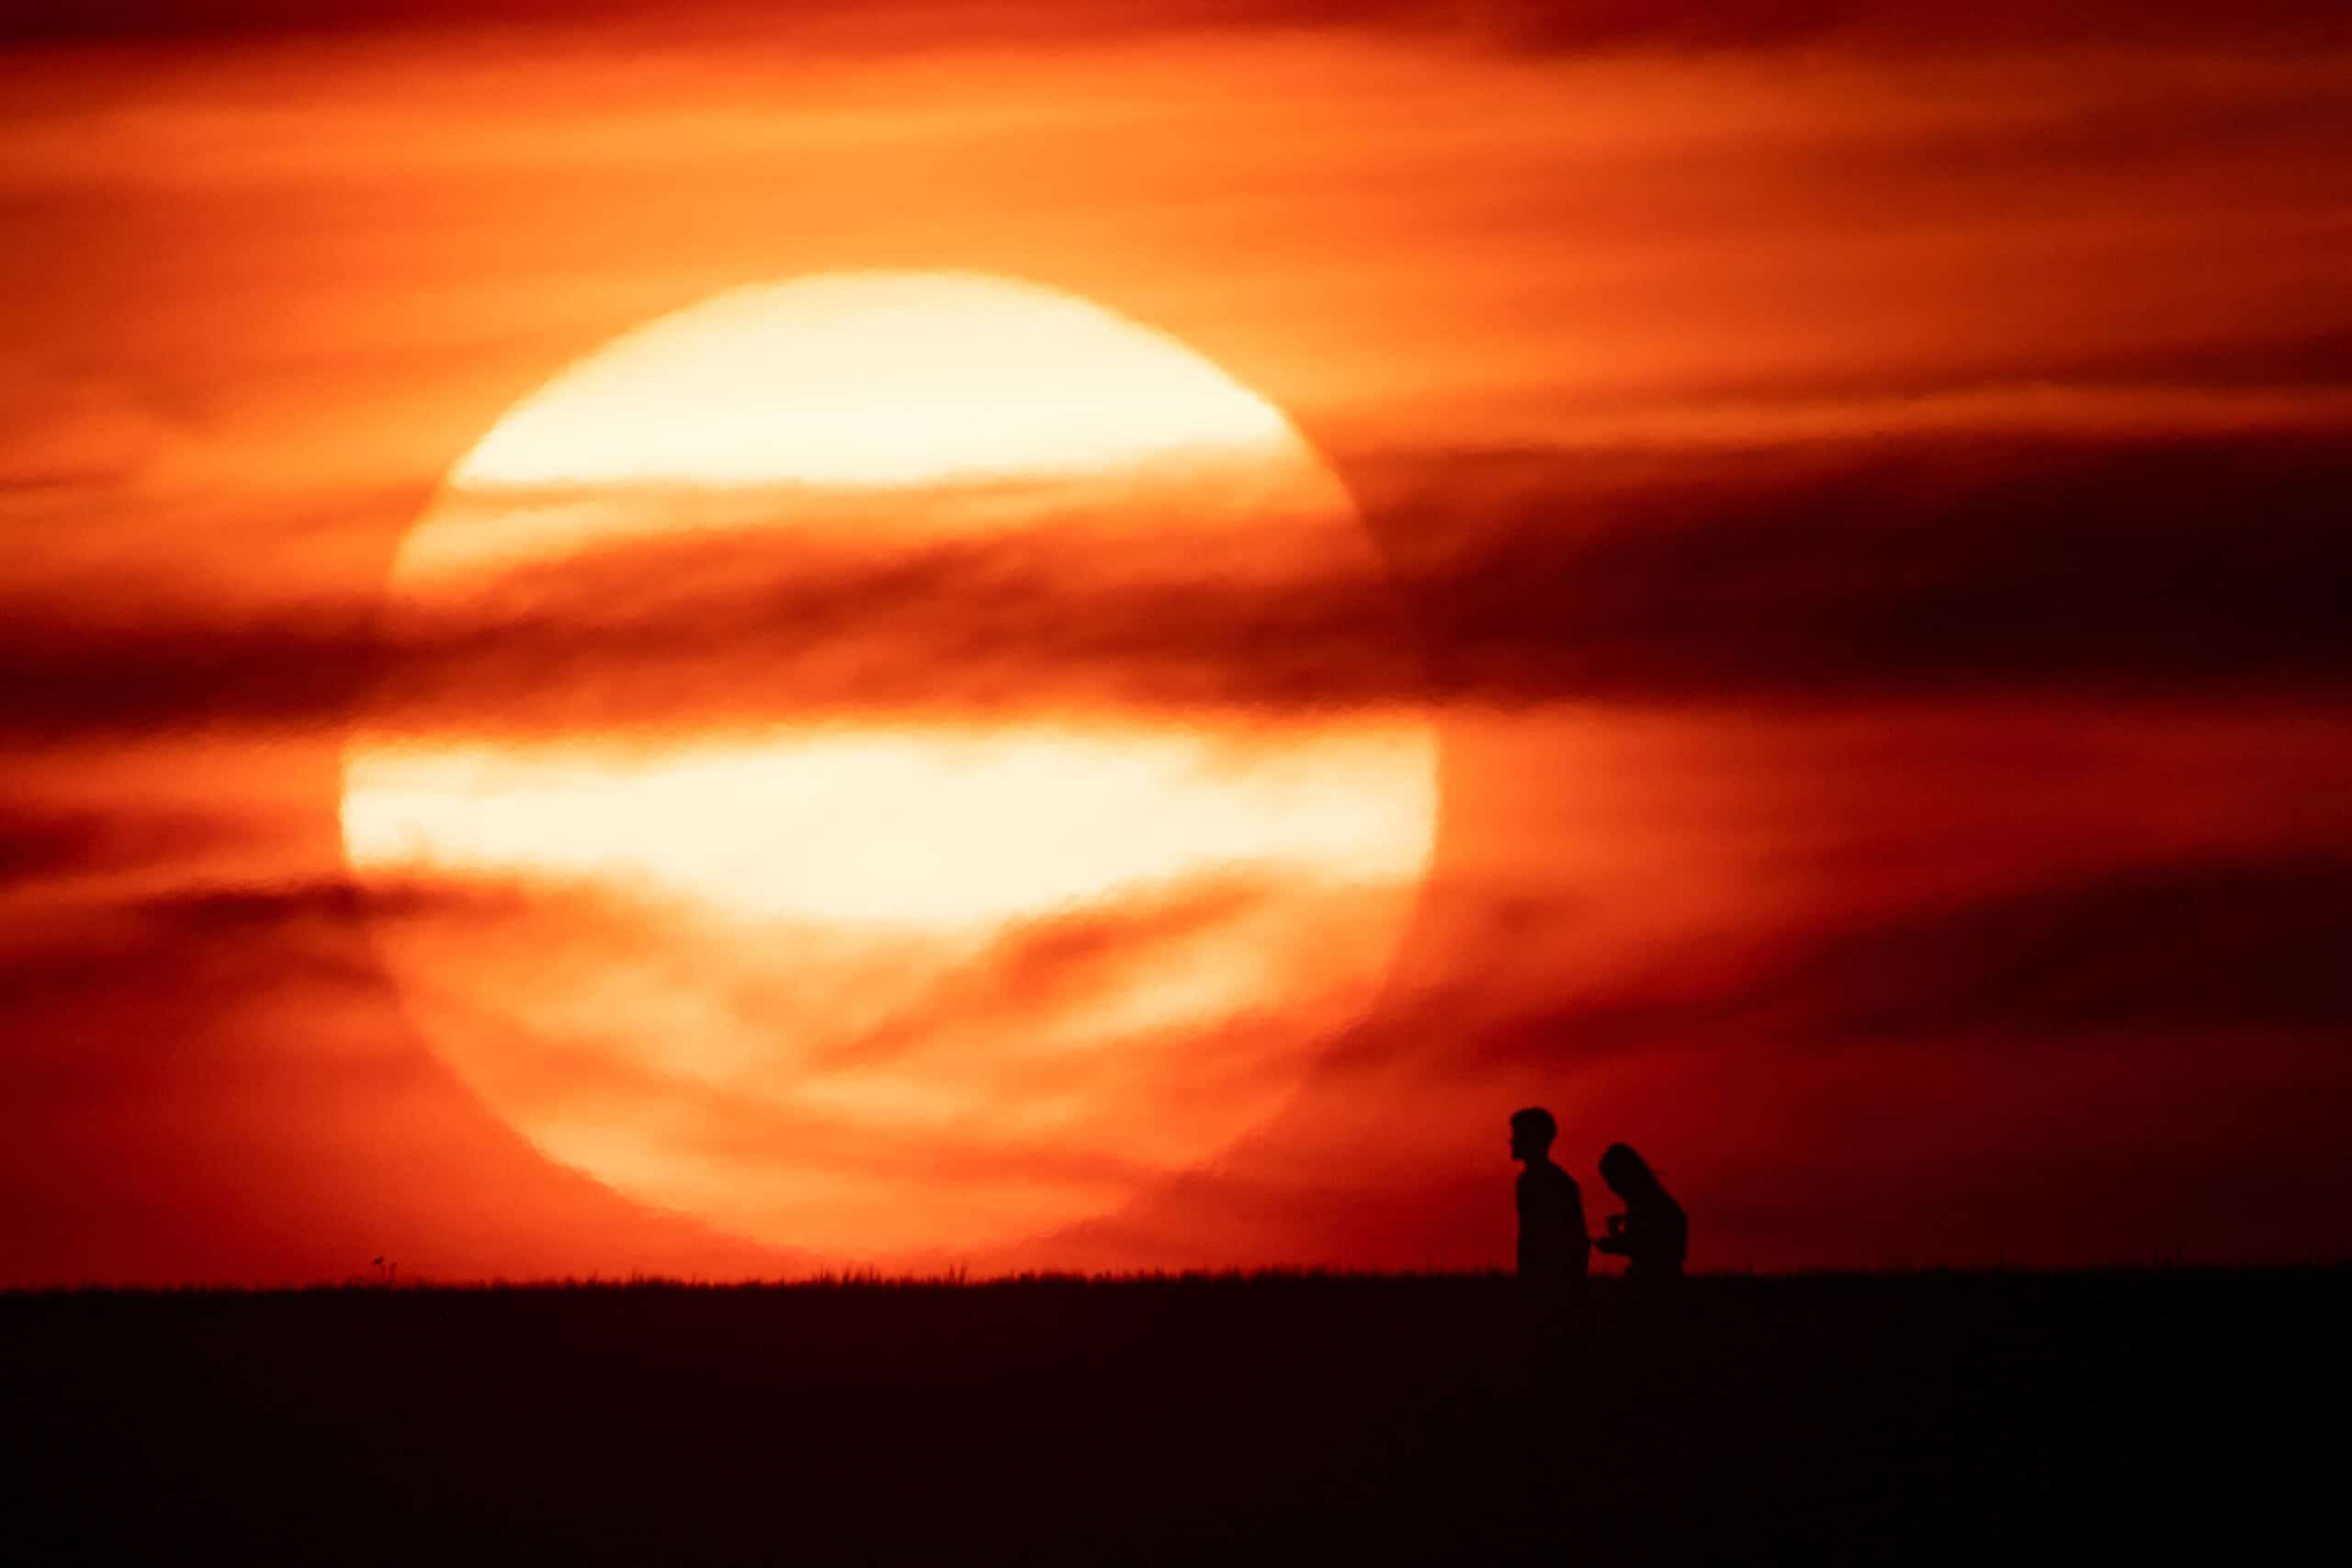 UK sees annual temperatures average more than 10C for first time